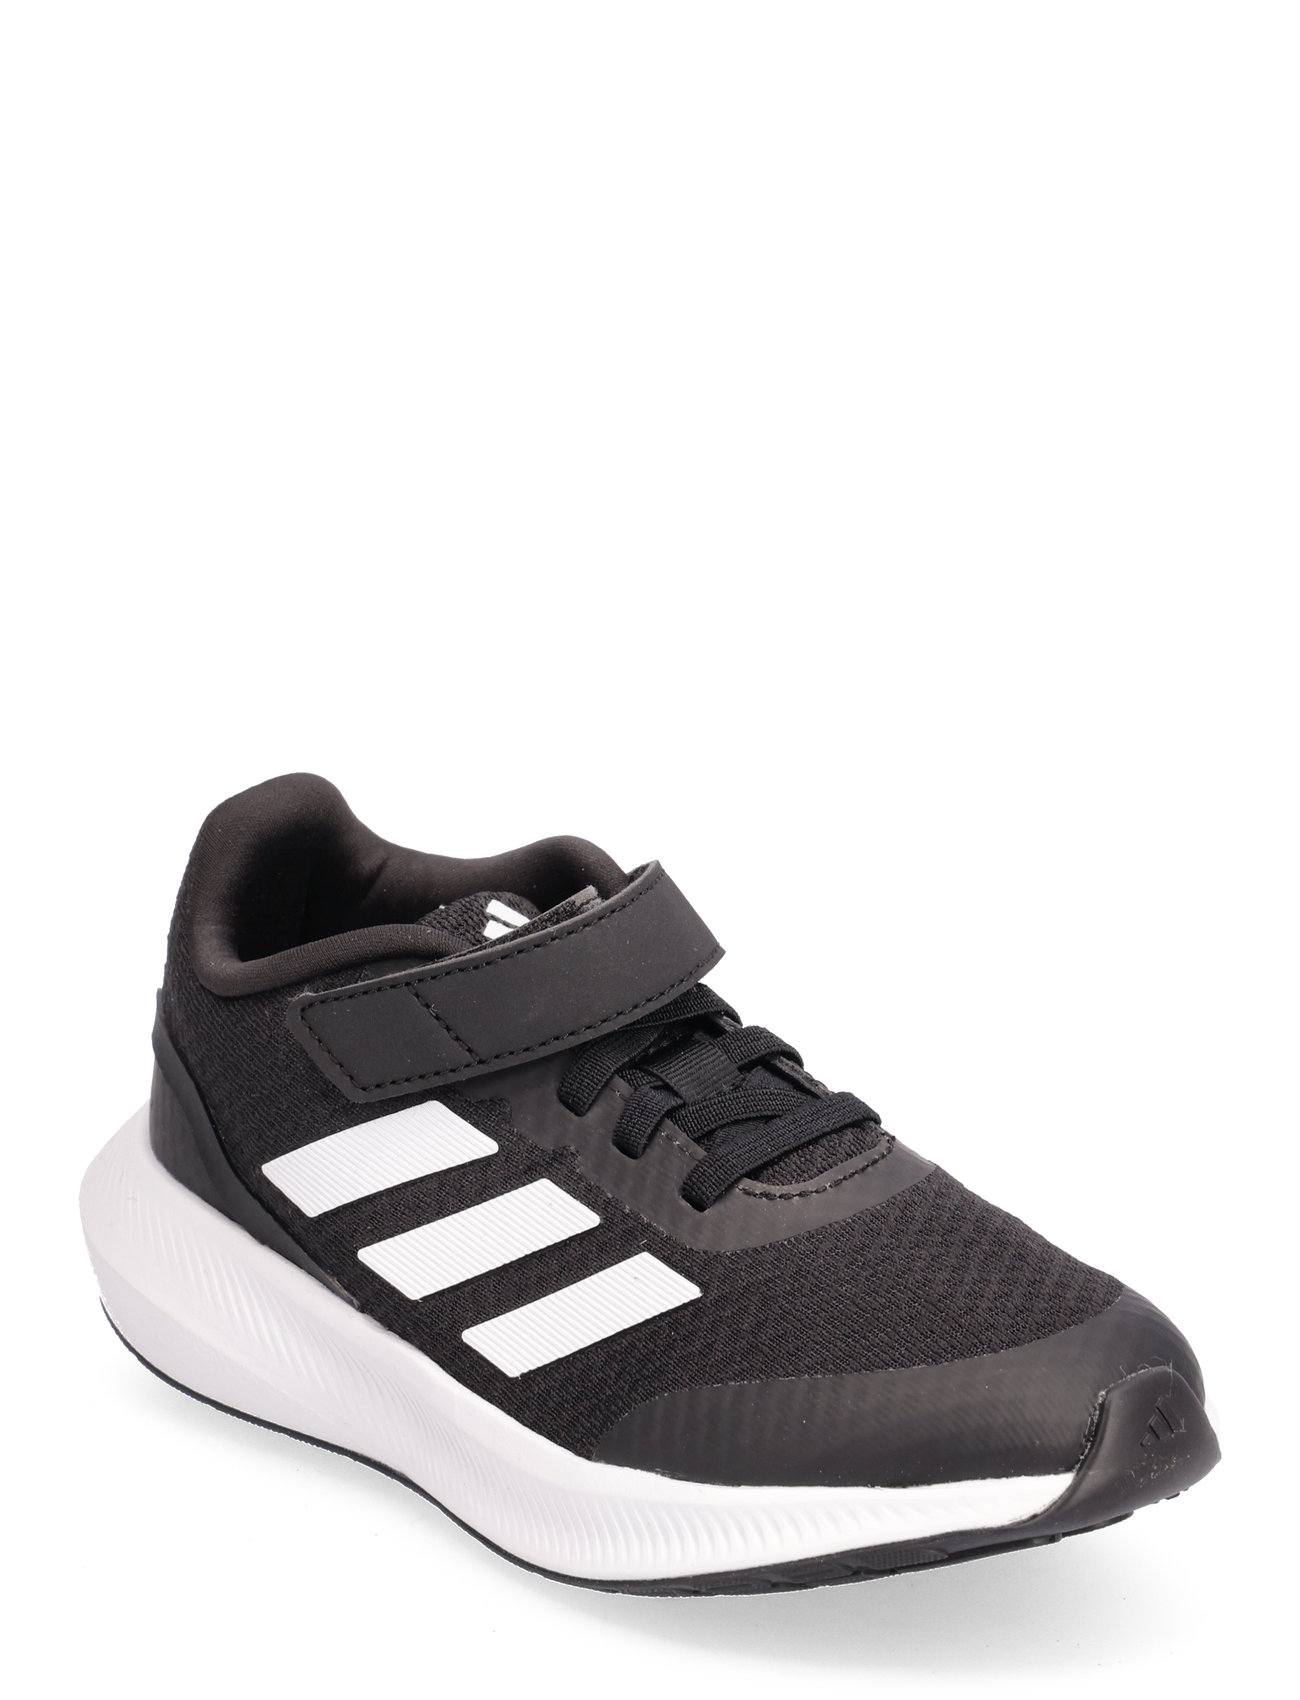 Strap adidas Elastic Shoes Top Low Tops Performance 3.0 Lace - Runfalcon